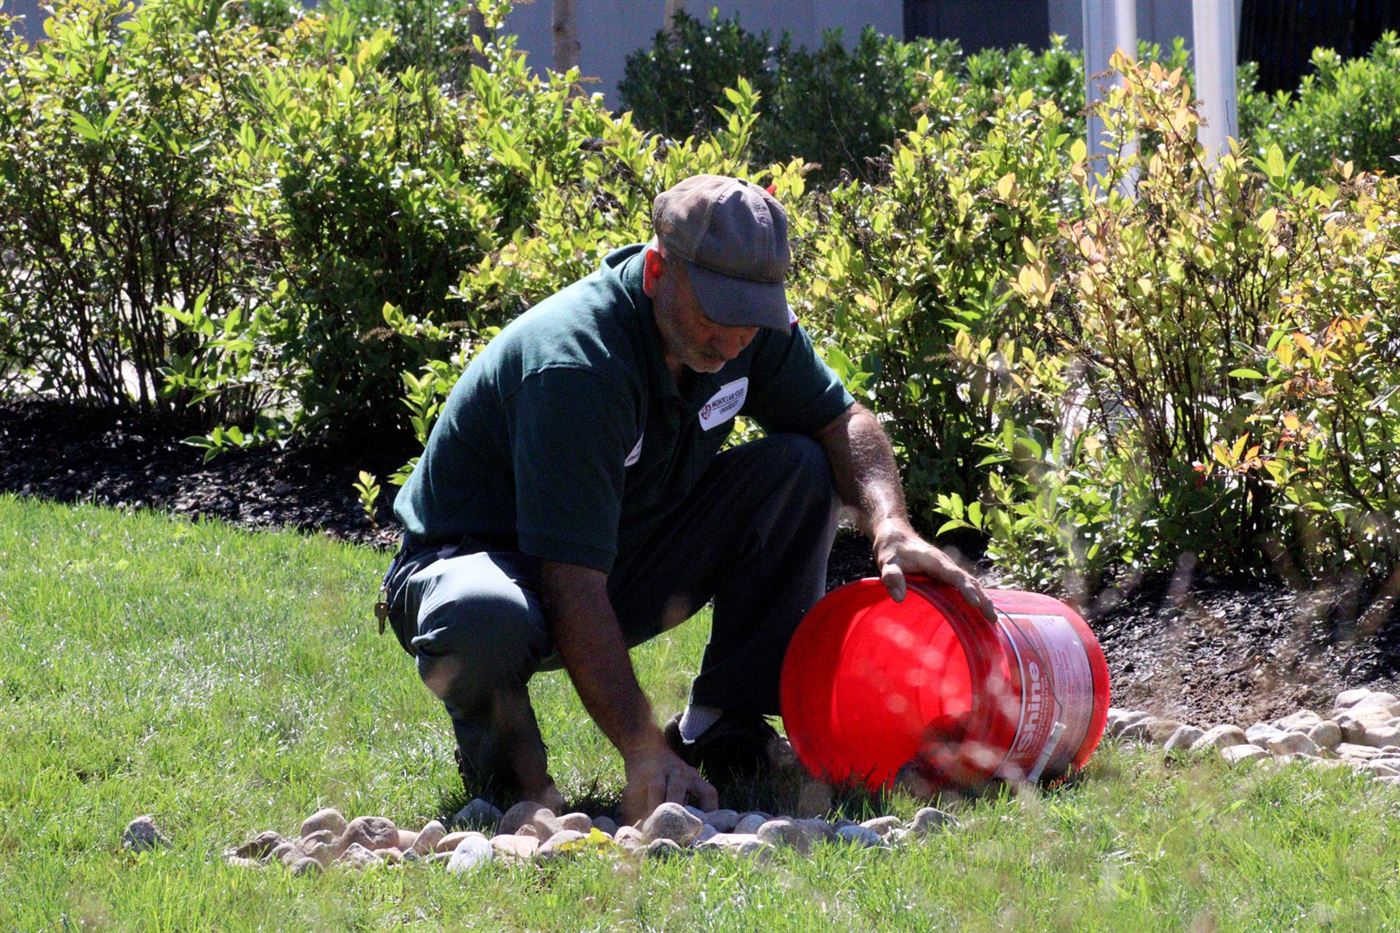 A Montclair State landscaper restoring the rocks and soil around the bushes. John LaRosa | The Montclarion